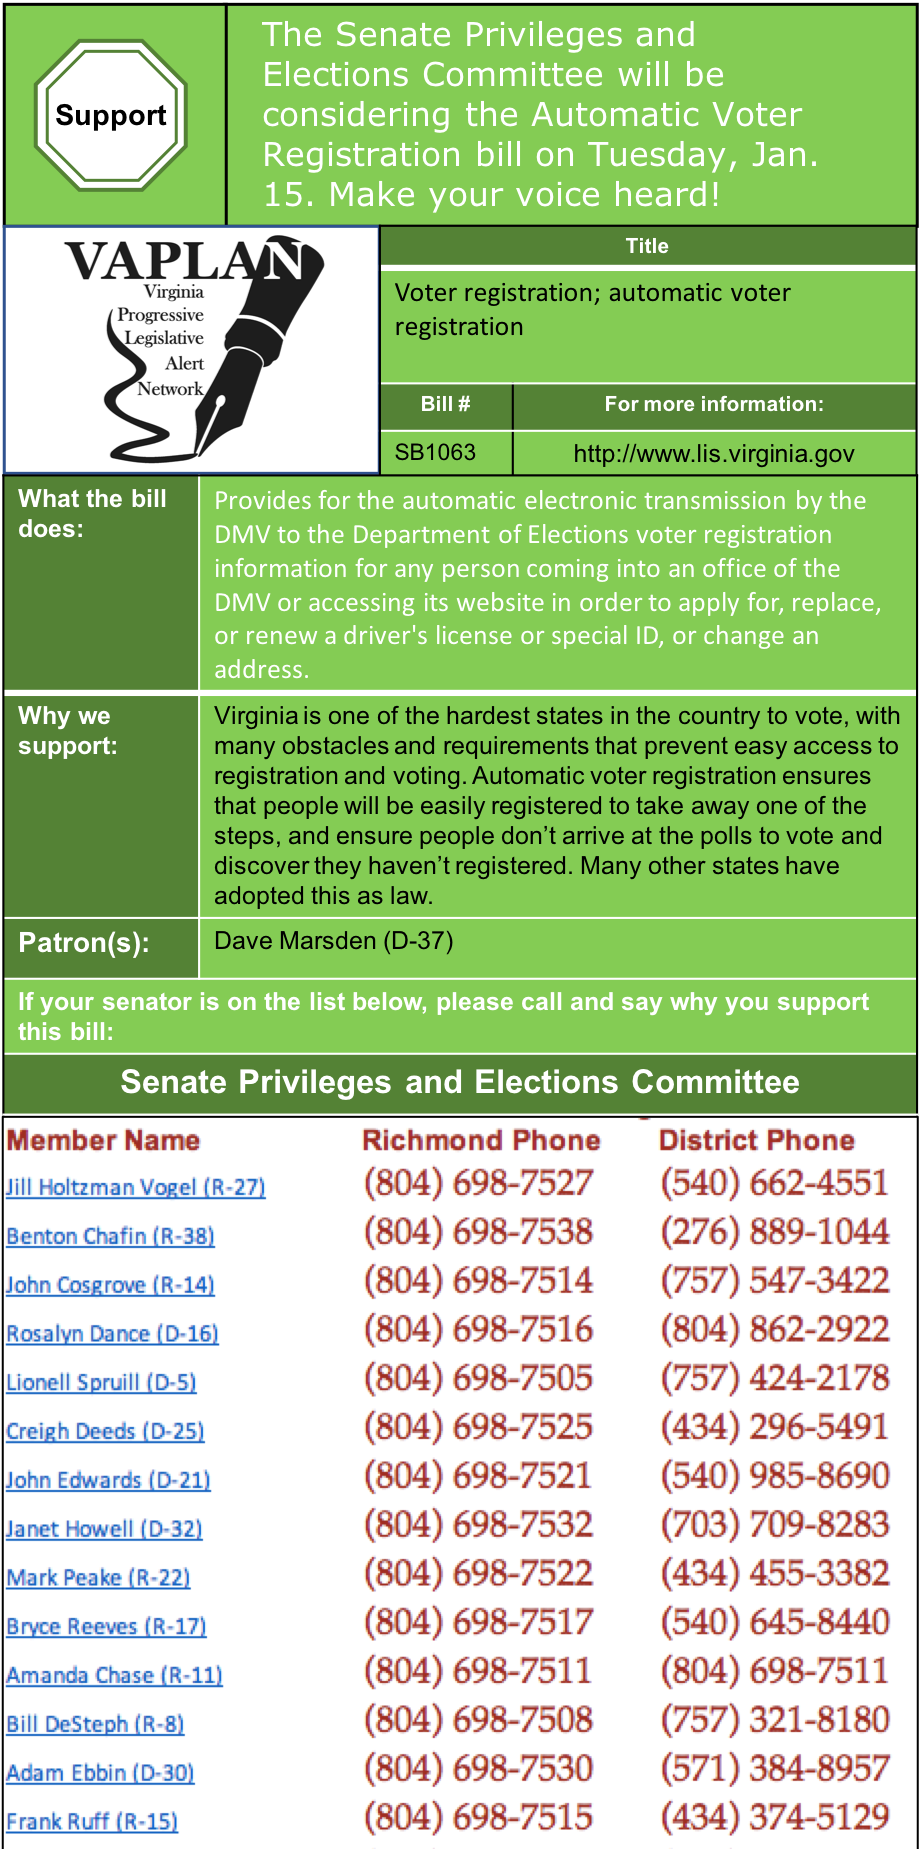 ALERT: Support Automatic Voter Registration in Senate Privileges and Elections Tues. Jan. 15